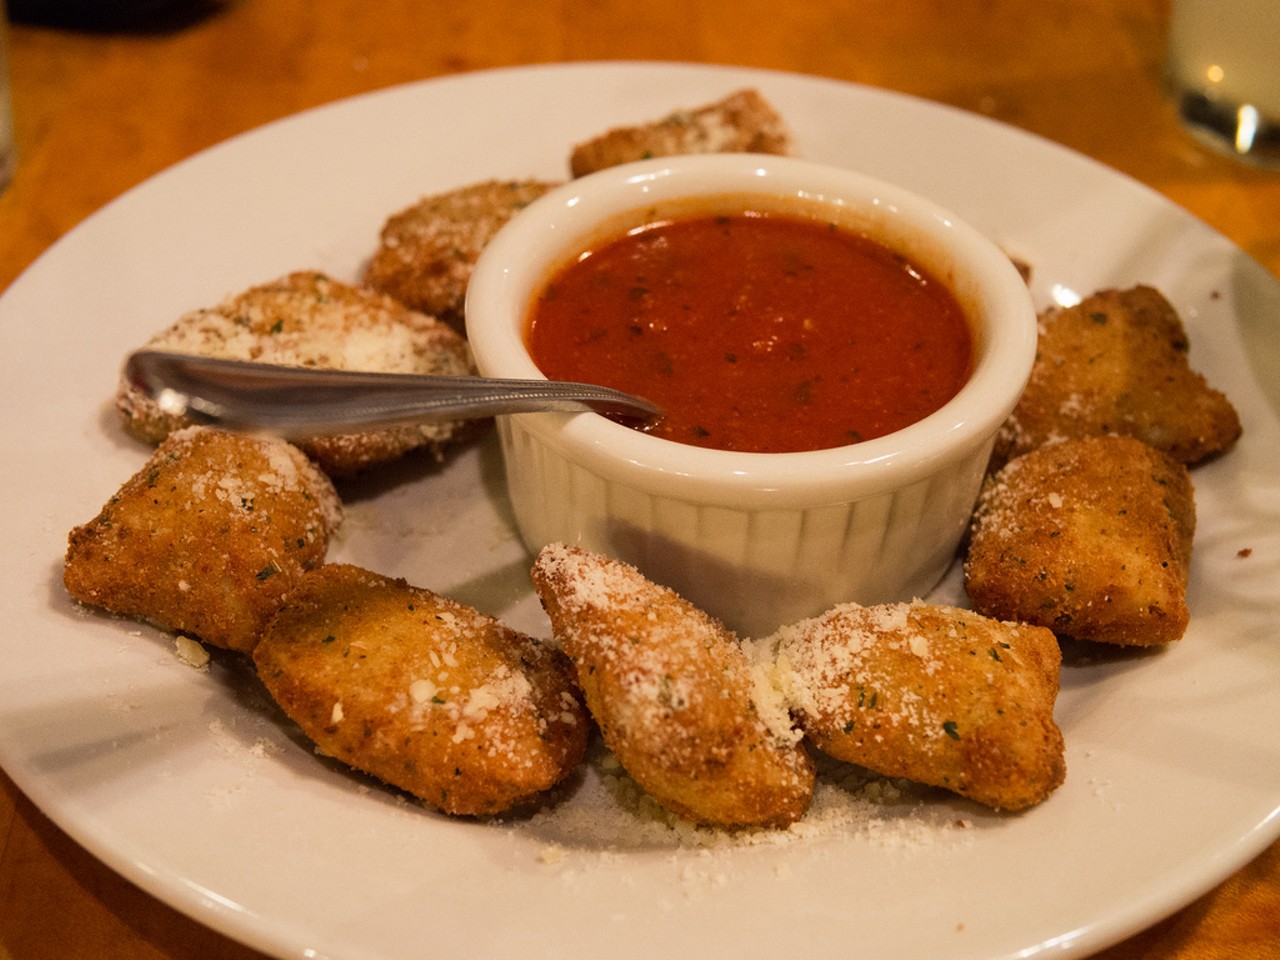 And last but not least, introduce them to toasted ravioli.
You haven't truly been to St. Louis until you've tried the toasted ravioli. They'll return home full, happy and ready to tell all their friends how awesome St. Louis truly is. Bon appetit! 